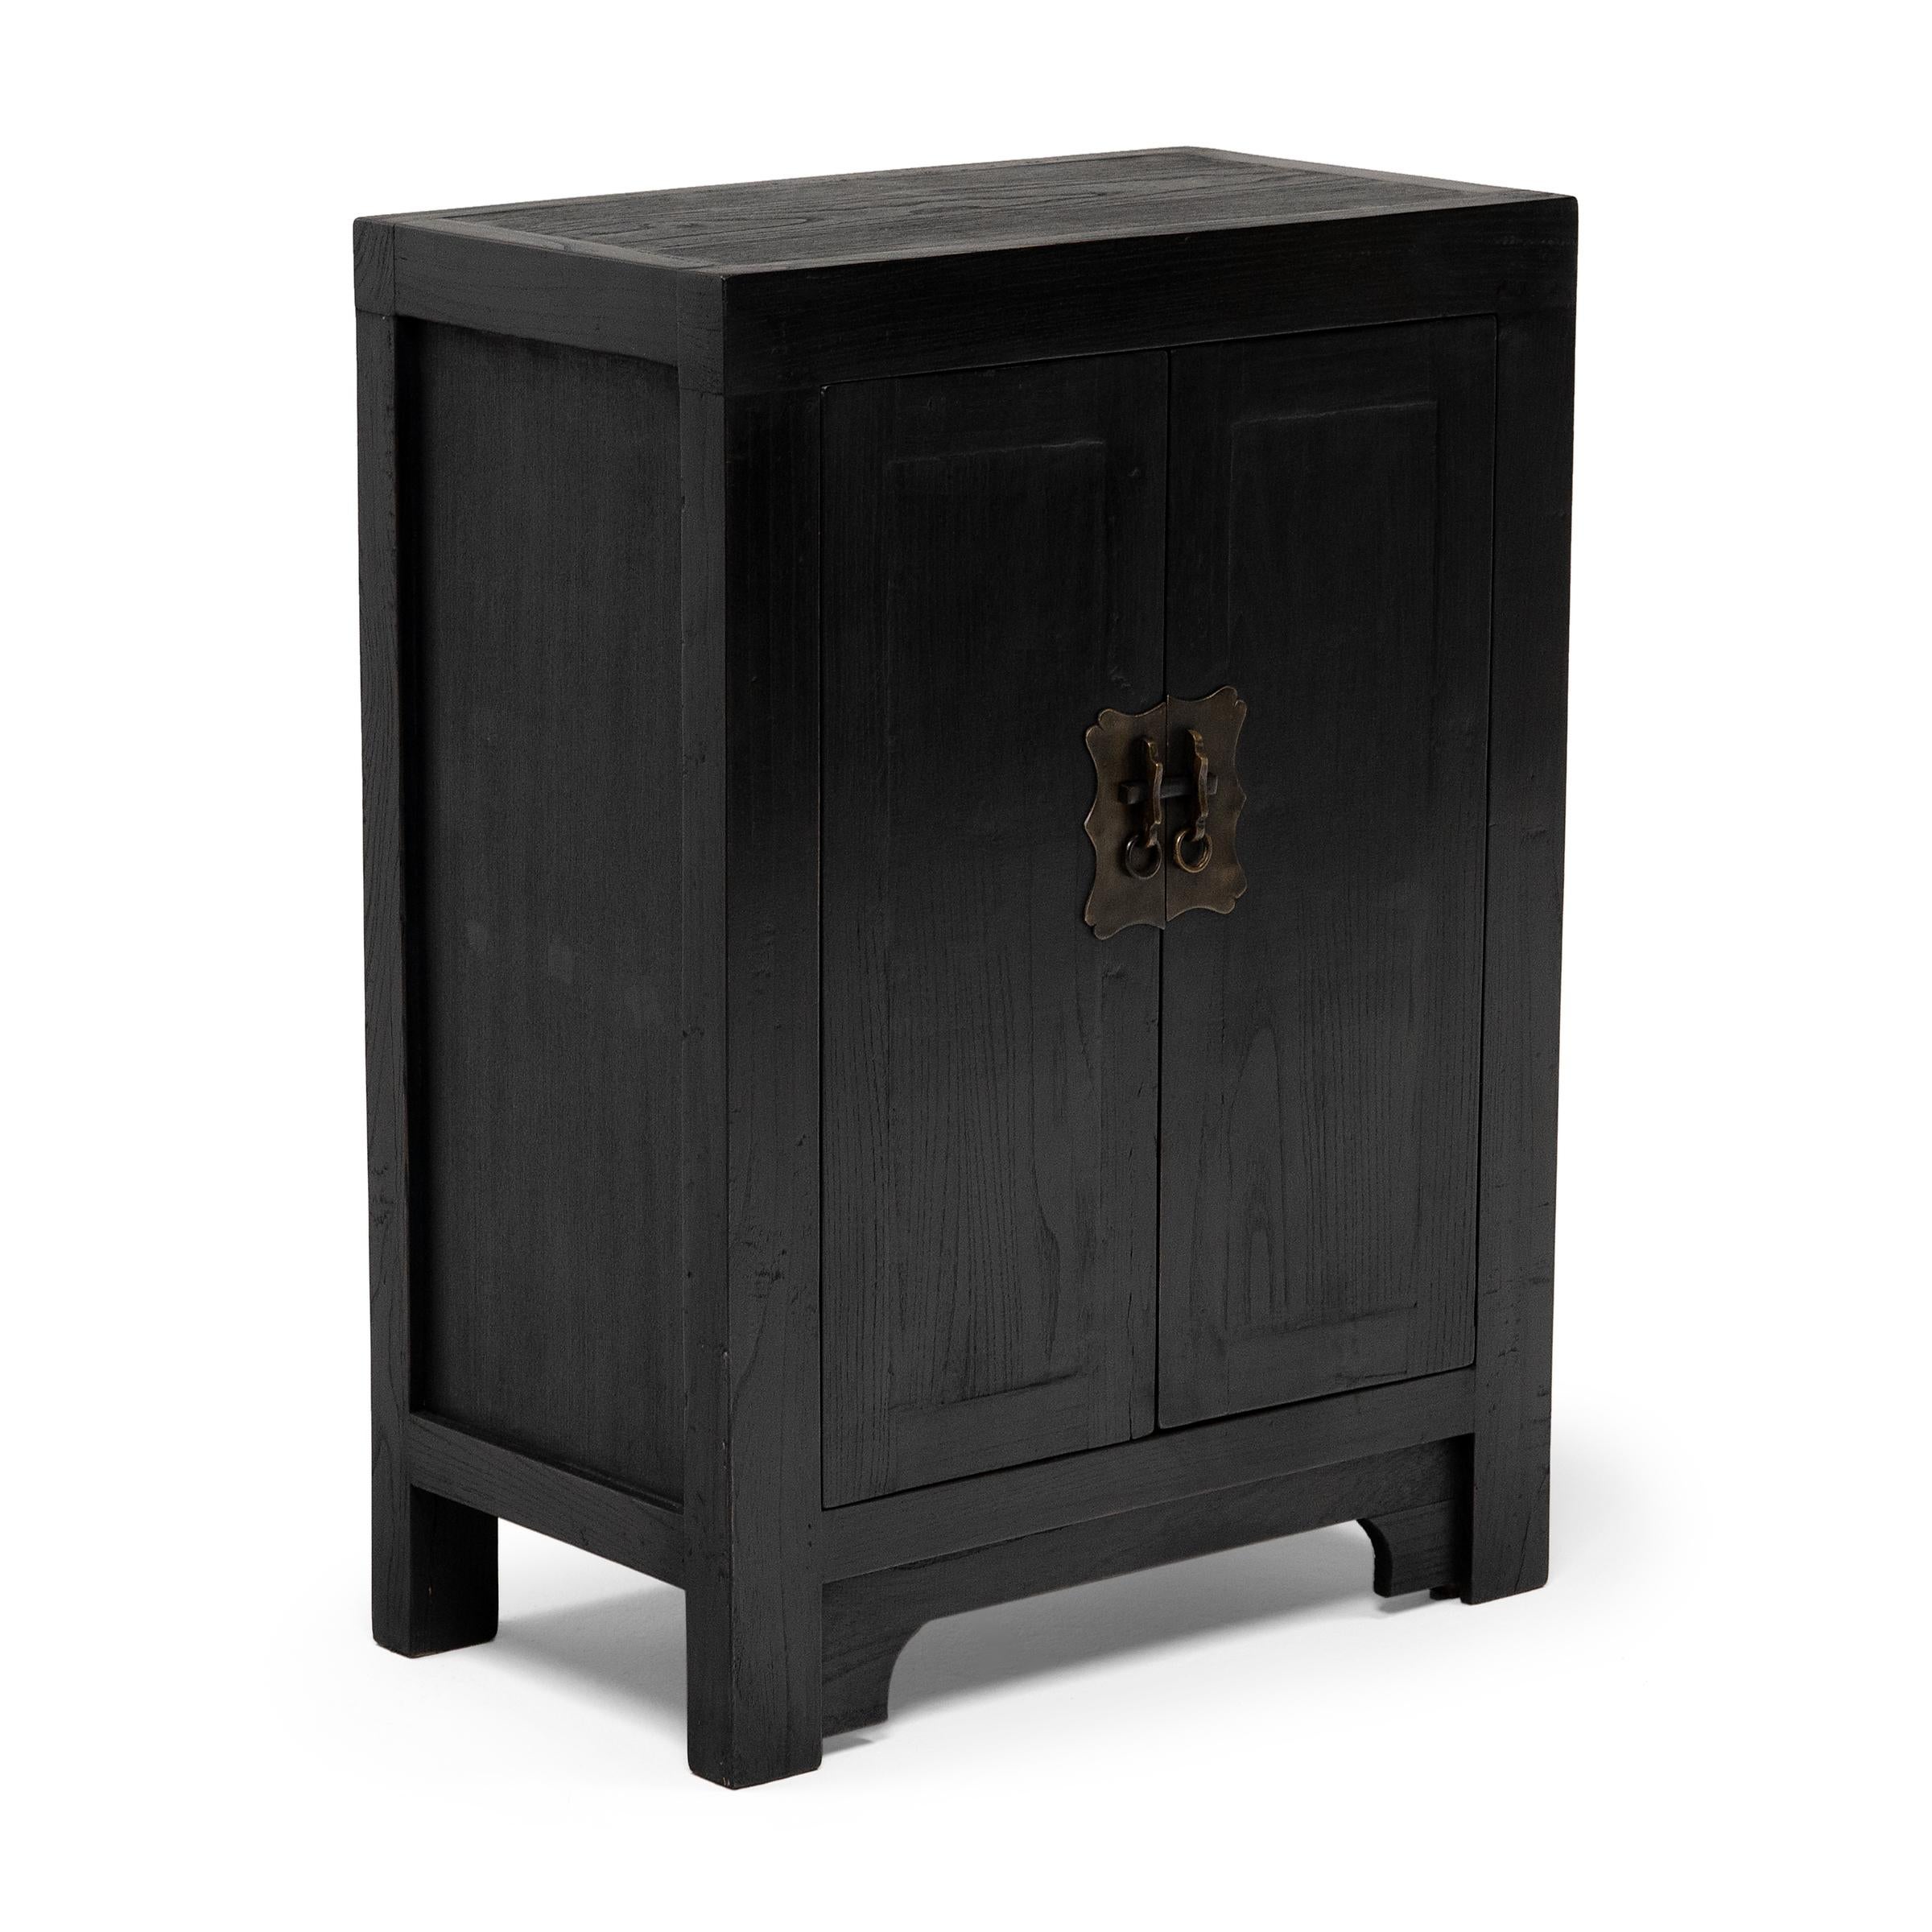 Perfecting line and proportion, the simple design of this low locking chest celebrates the restraint of classic Chinese furniture forms. Crafted from reclaimed elmwood, the cabinet is modeled after those used for general storage in a Qing-dynasty